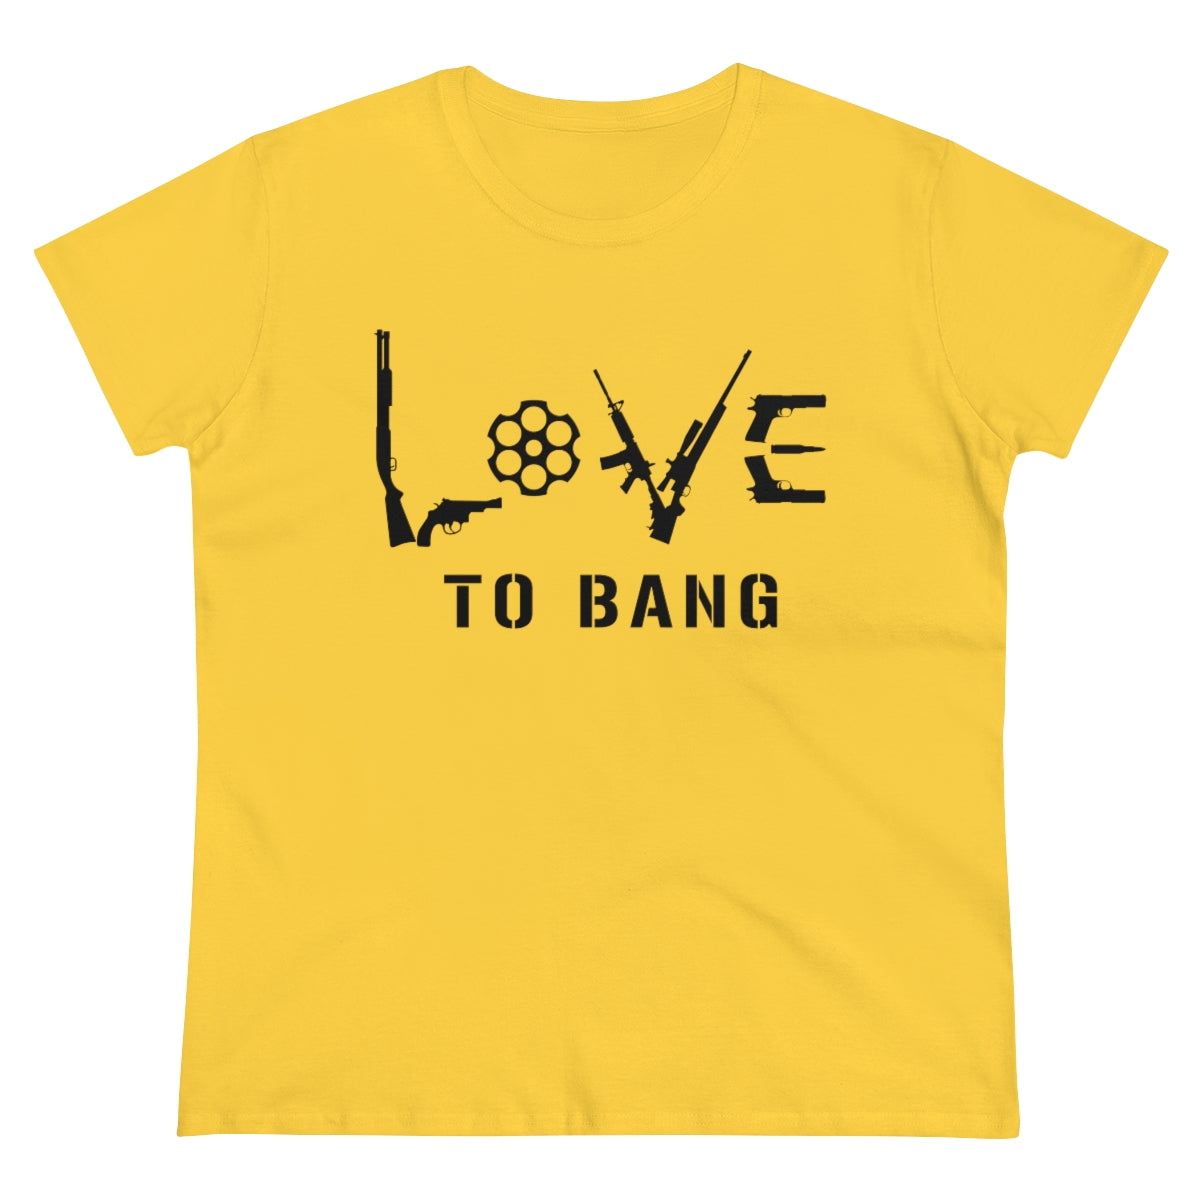 Love To Bang | Women's Tee - Rise of The New Media